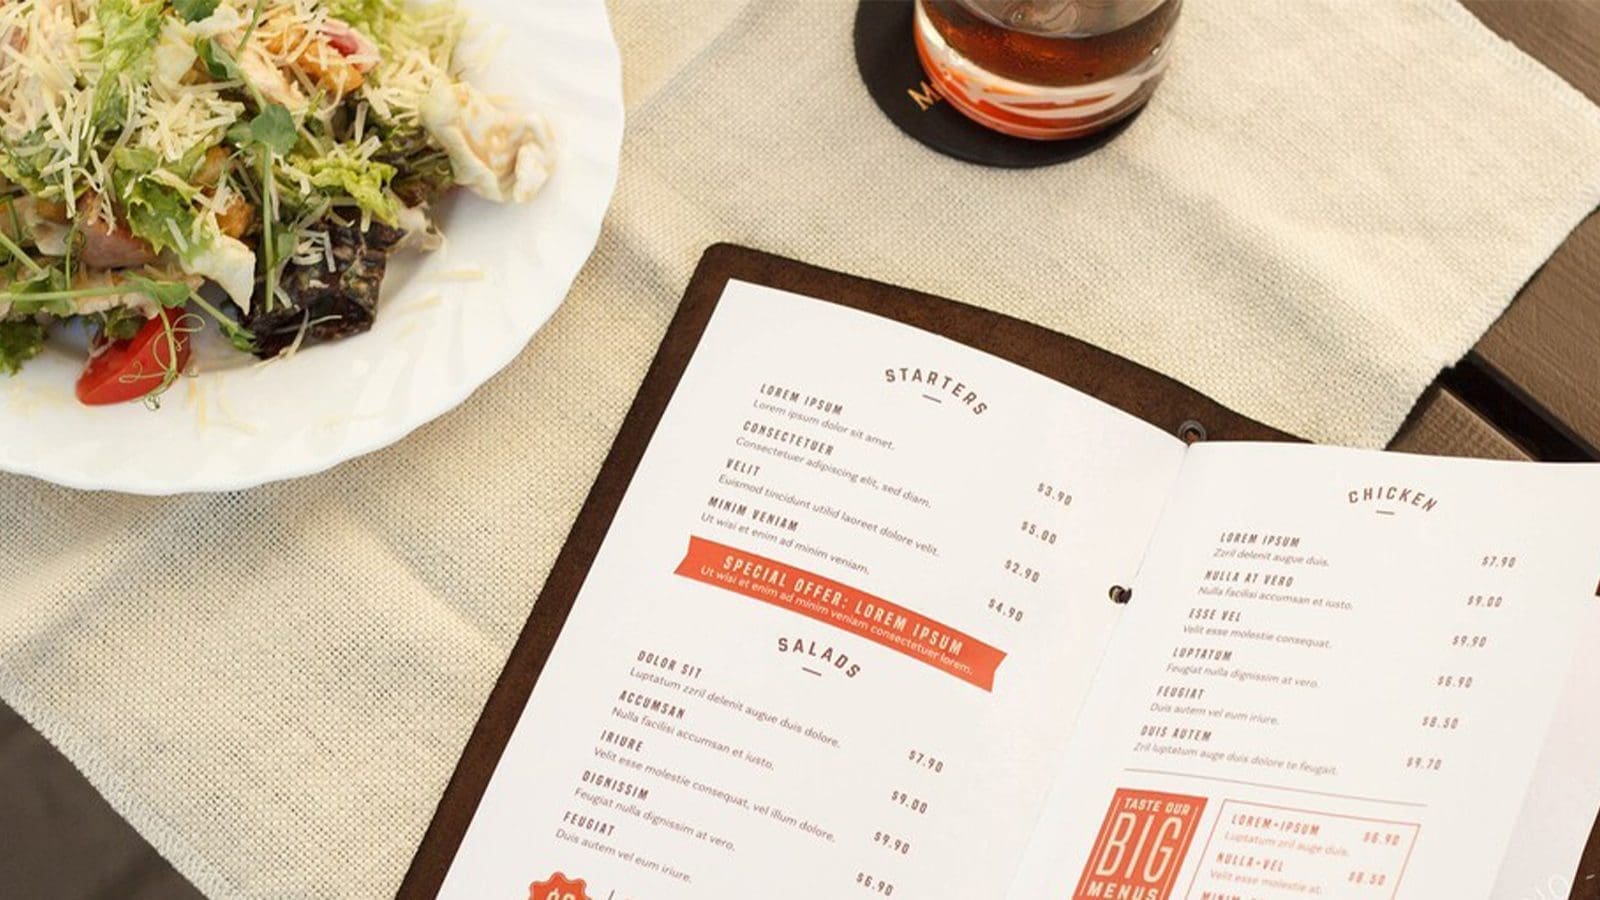 Font manipulation can lead diners to opt for healthier food selections, research suggests